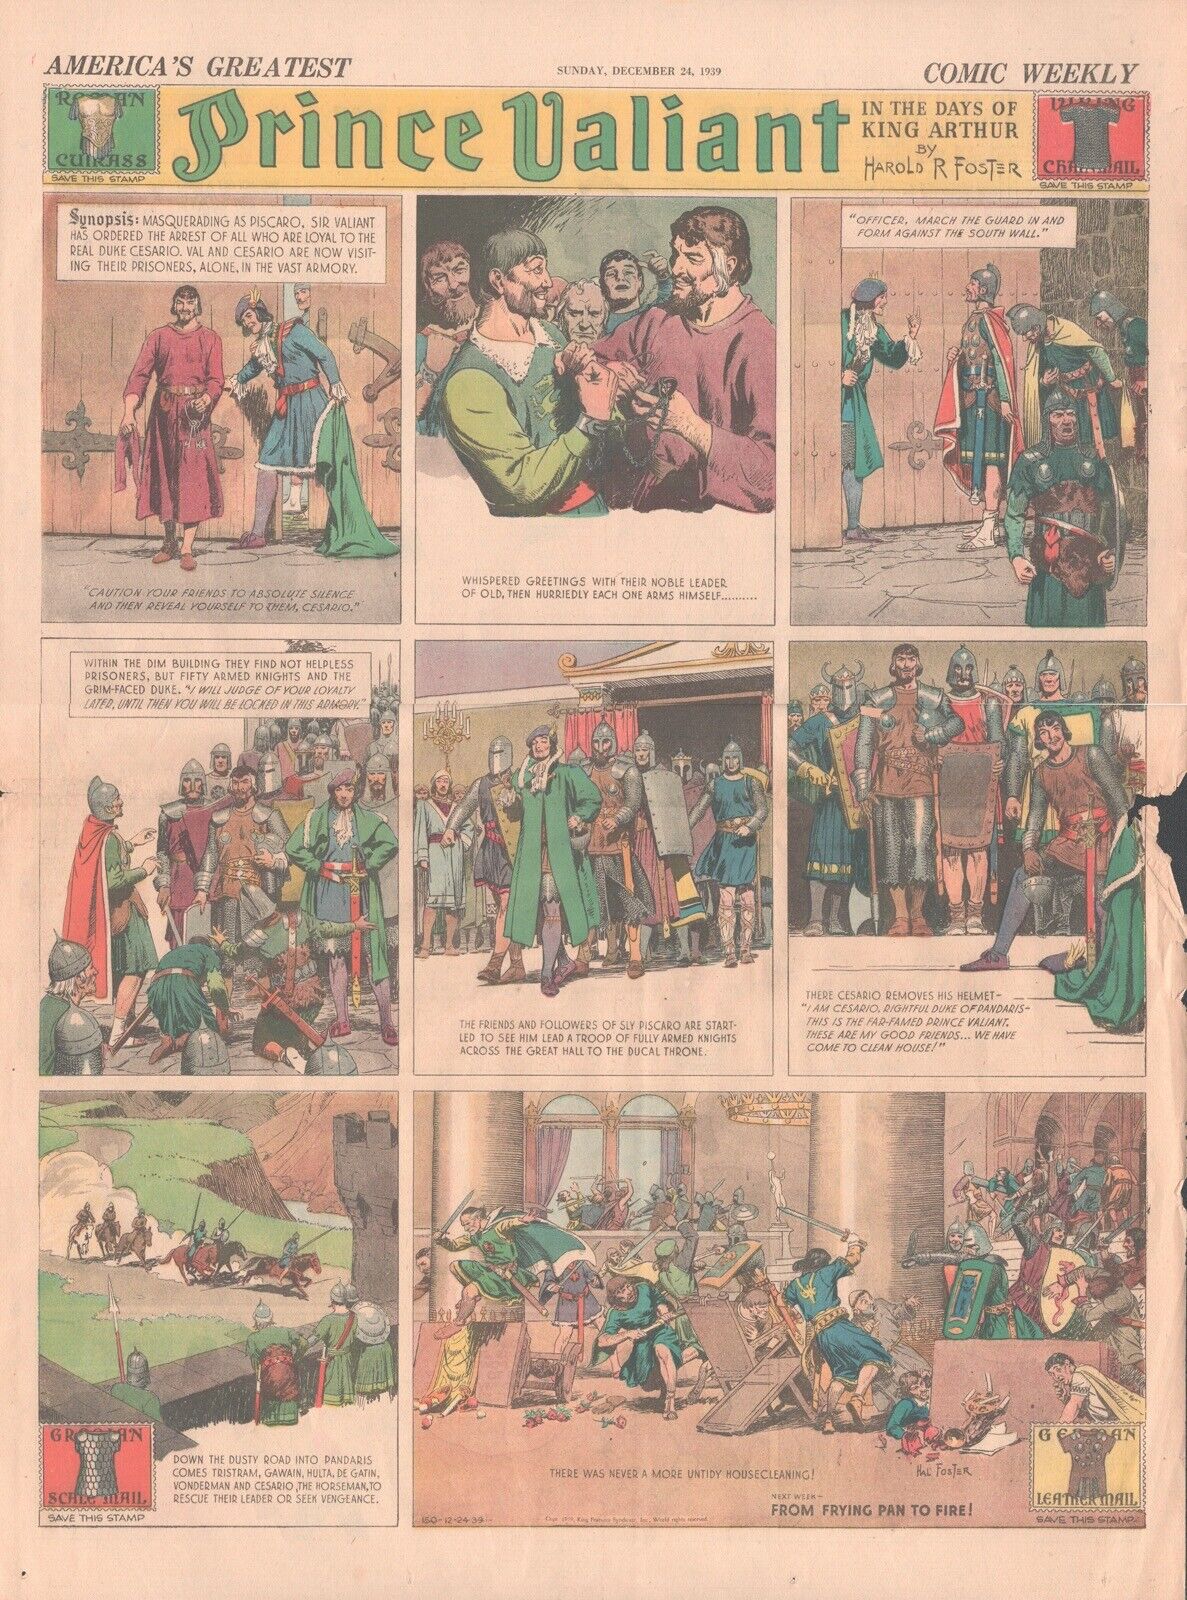 Hal Fosters Prince Valiant Sunday No. 150 - 12/24/1939 Full